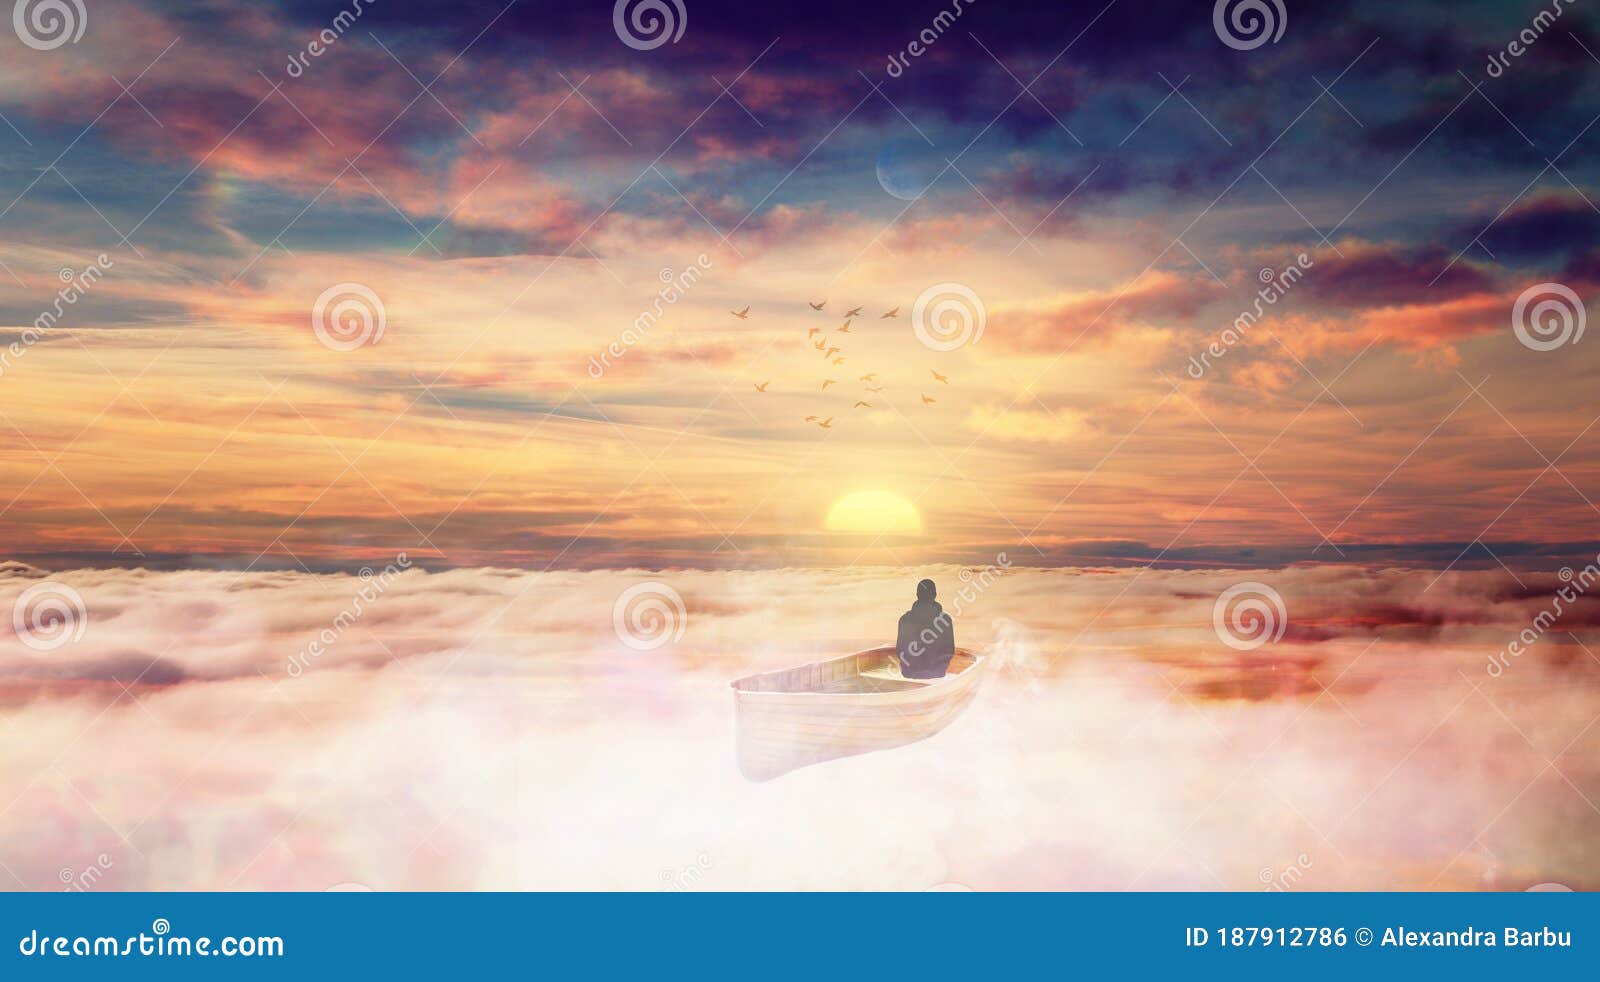 boat to heaven, above clouds, soul journey to the light, heavenly sky, path to god